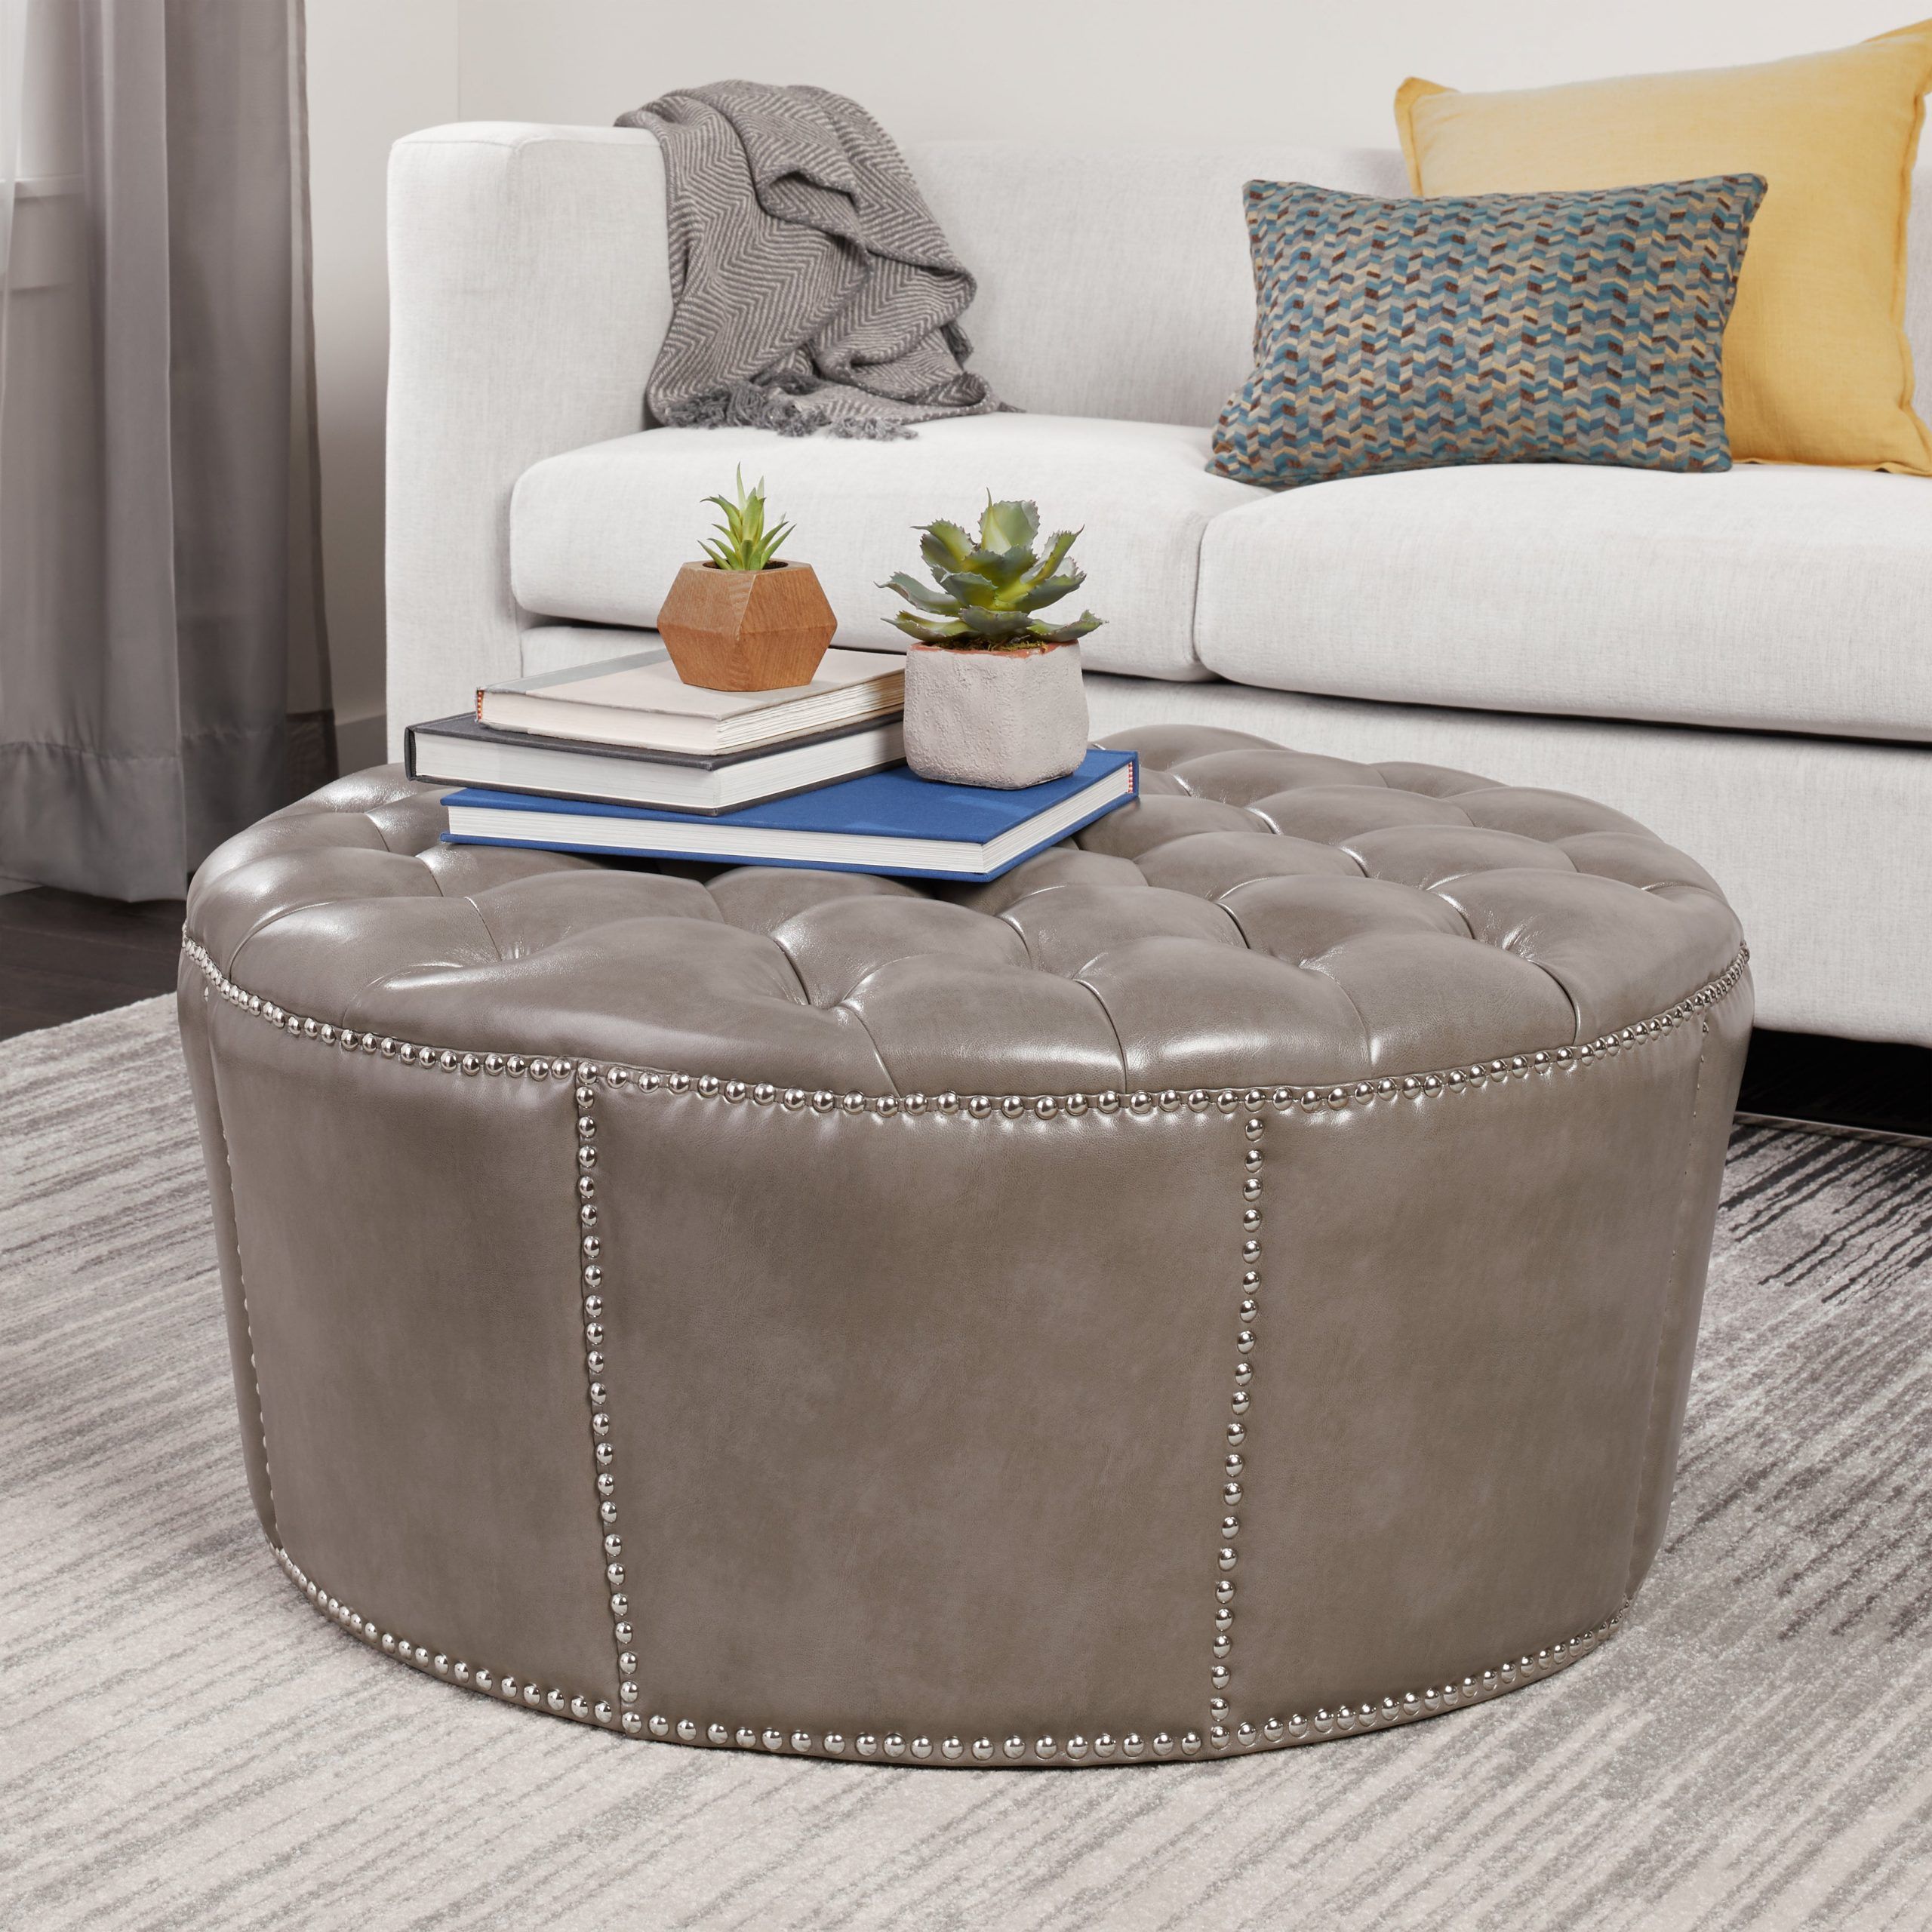 [%abbyson Newport Grey Leather Nailhead Trim Round Ottoman [17290794 Pertaining To Well Known Medium Gray Leather Pouf Ottomans|medium Gray Leather Pouf Ottomans Pertaining To Most Current Abbyson Newport Grey Leather Nailhead Trim Round Ottoman [17290794|most Recently Released Medium Gray Leather Pouf Ottomans With Regard To Abbyson Newport Grey Leather Nailhead Trim Round Ottoman [17290794|most Recently Released Abbyson Newport Grey Leather Nailhead Trim Round Ottoman [17290794 Intended For Medium Gray Leather Pouf Ottomans%] (View 3 of 10)